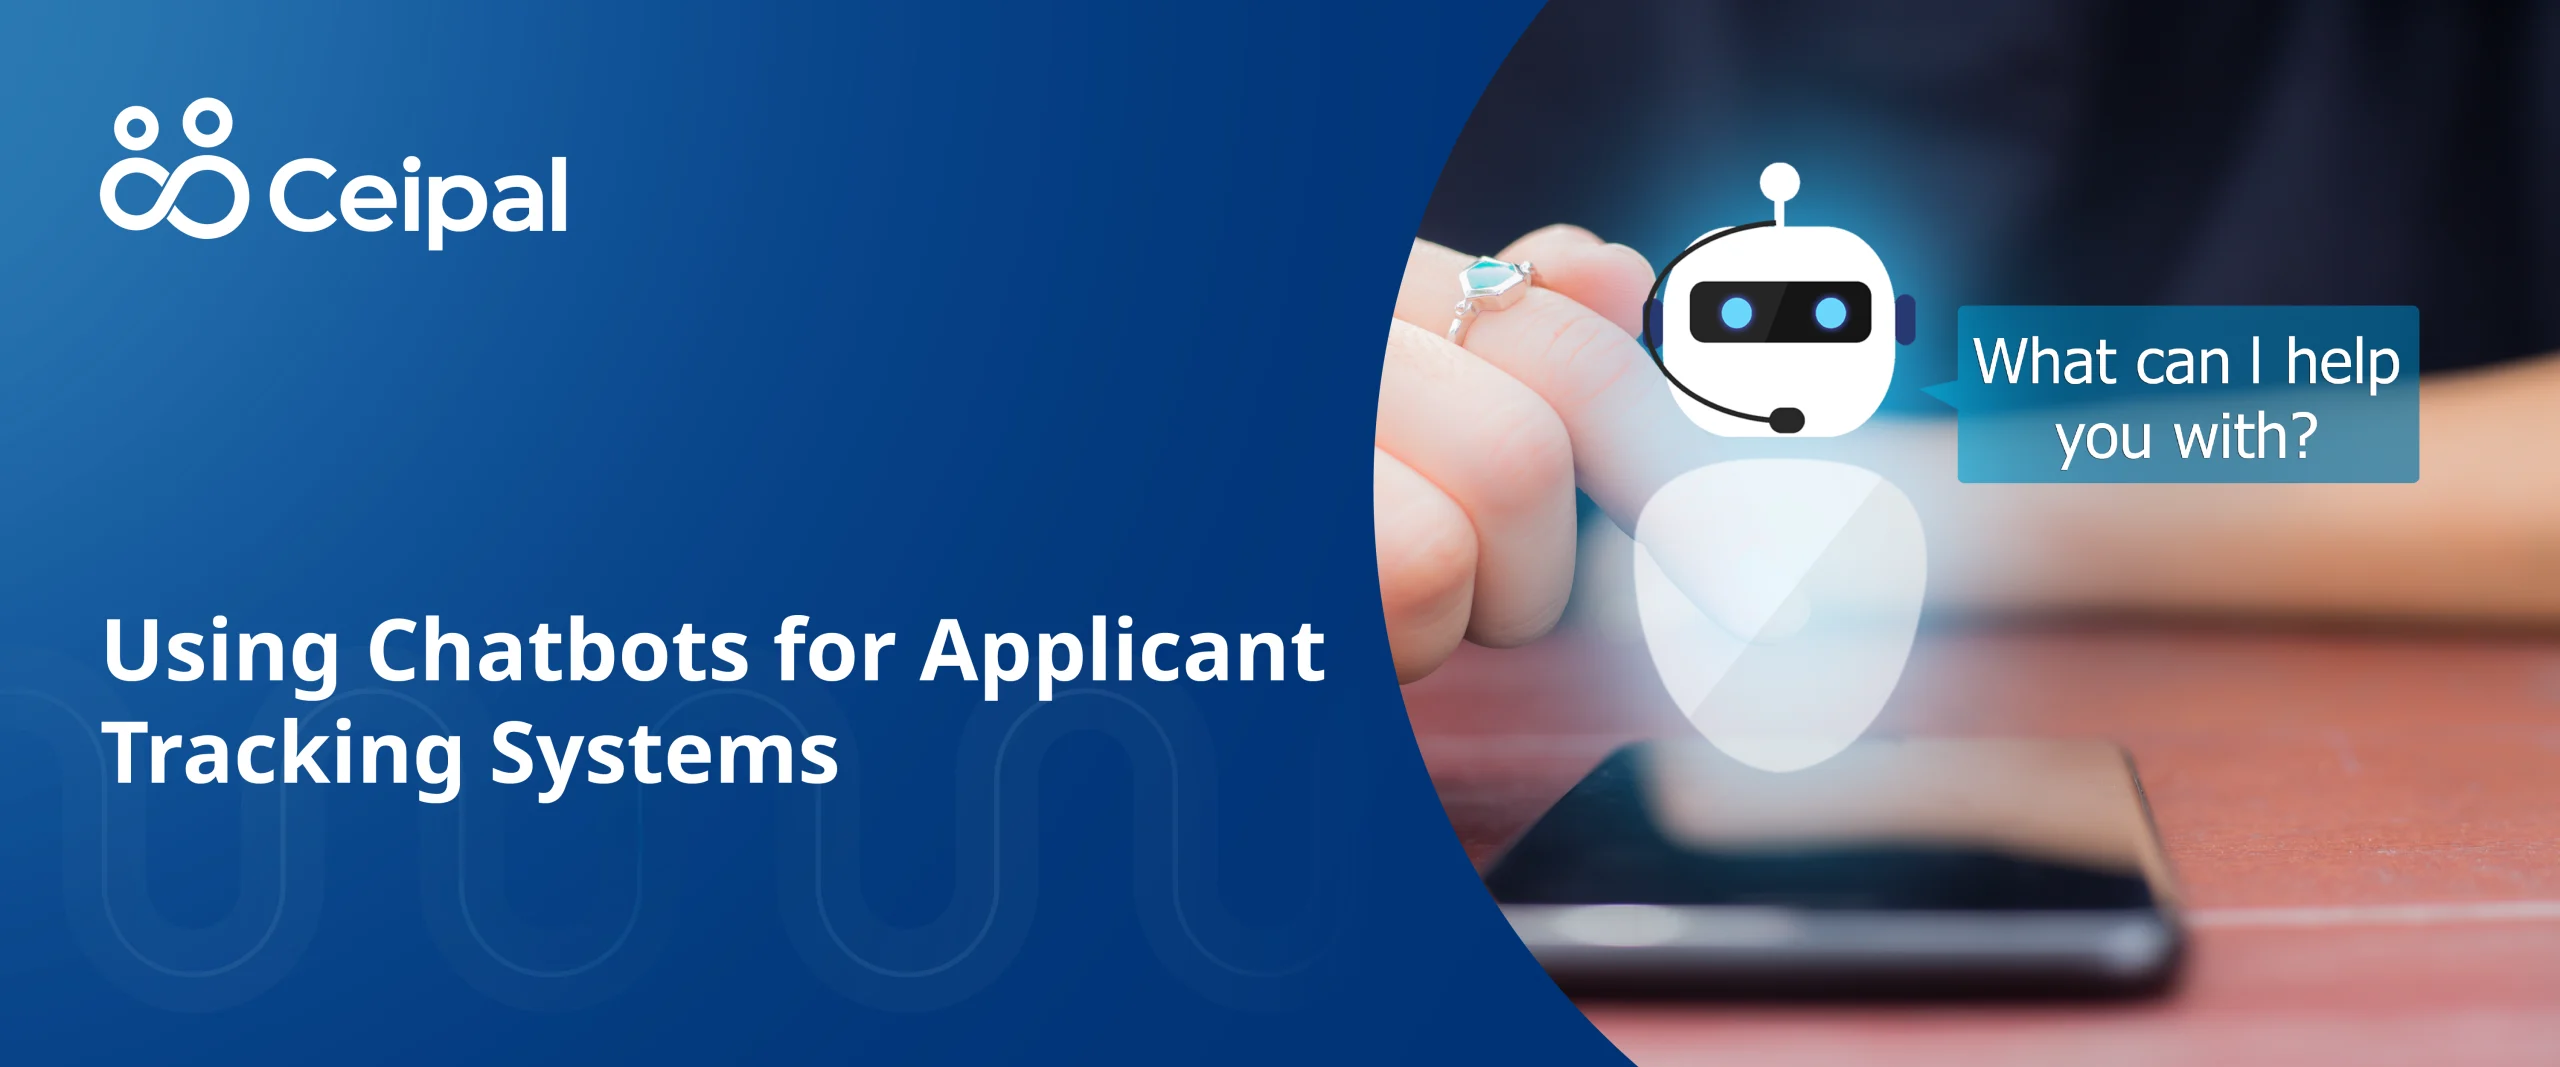 Using Chatbots for Applicant Tracking Systems